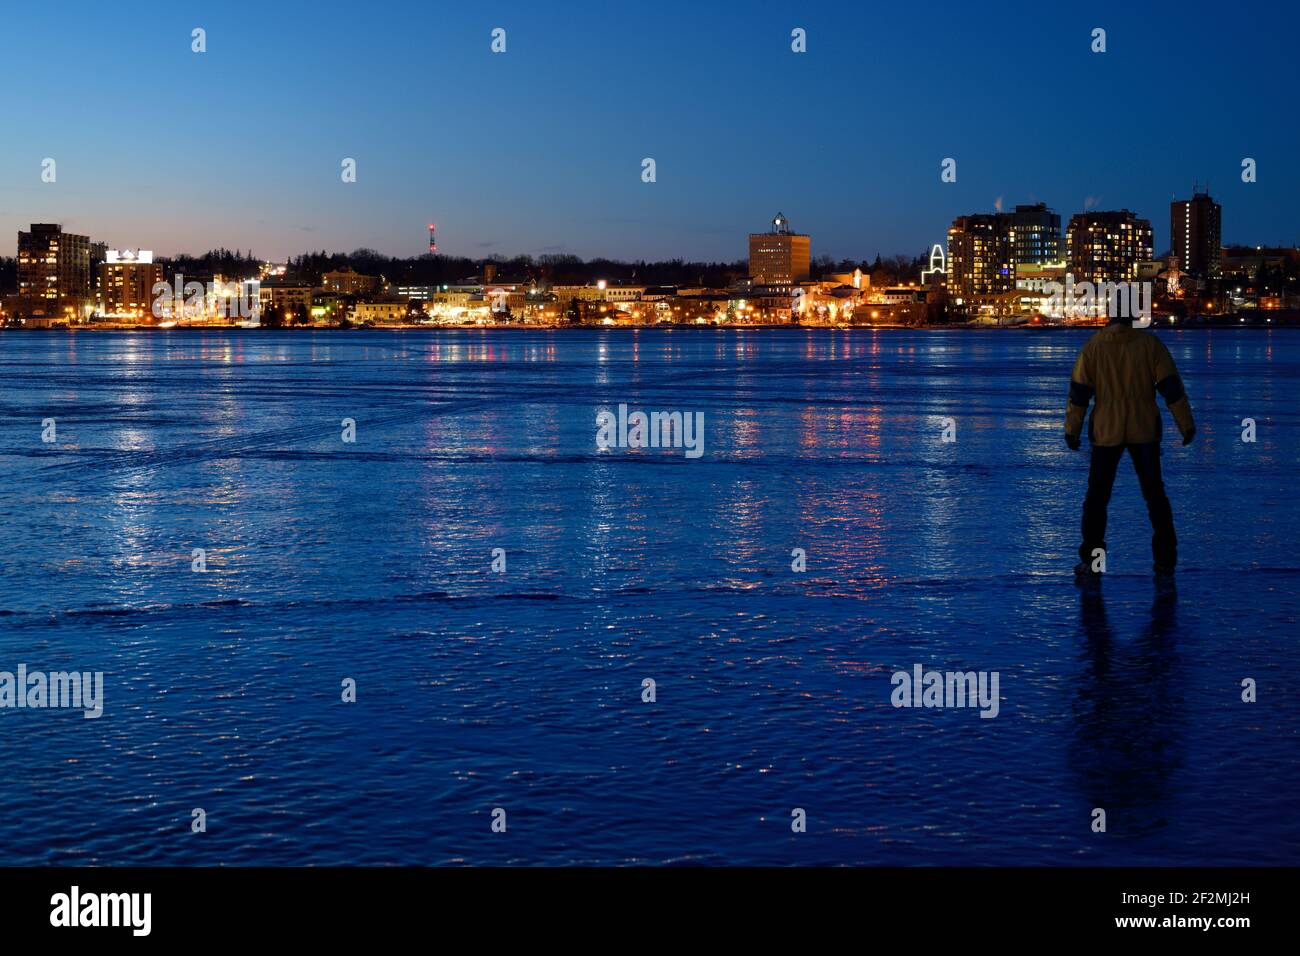 Man standing on thick ice of frozen Kempenfelt Bay at blue hour twilight in winter with lights of downtown Barrie Ontario Canada Stock Photo